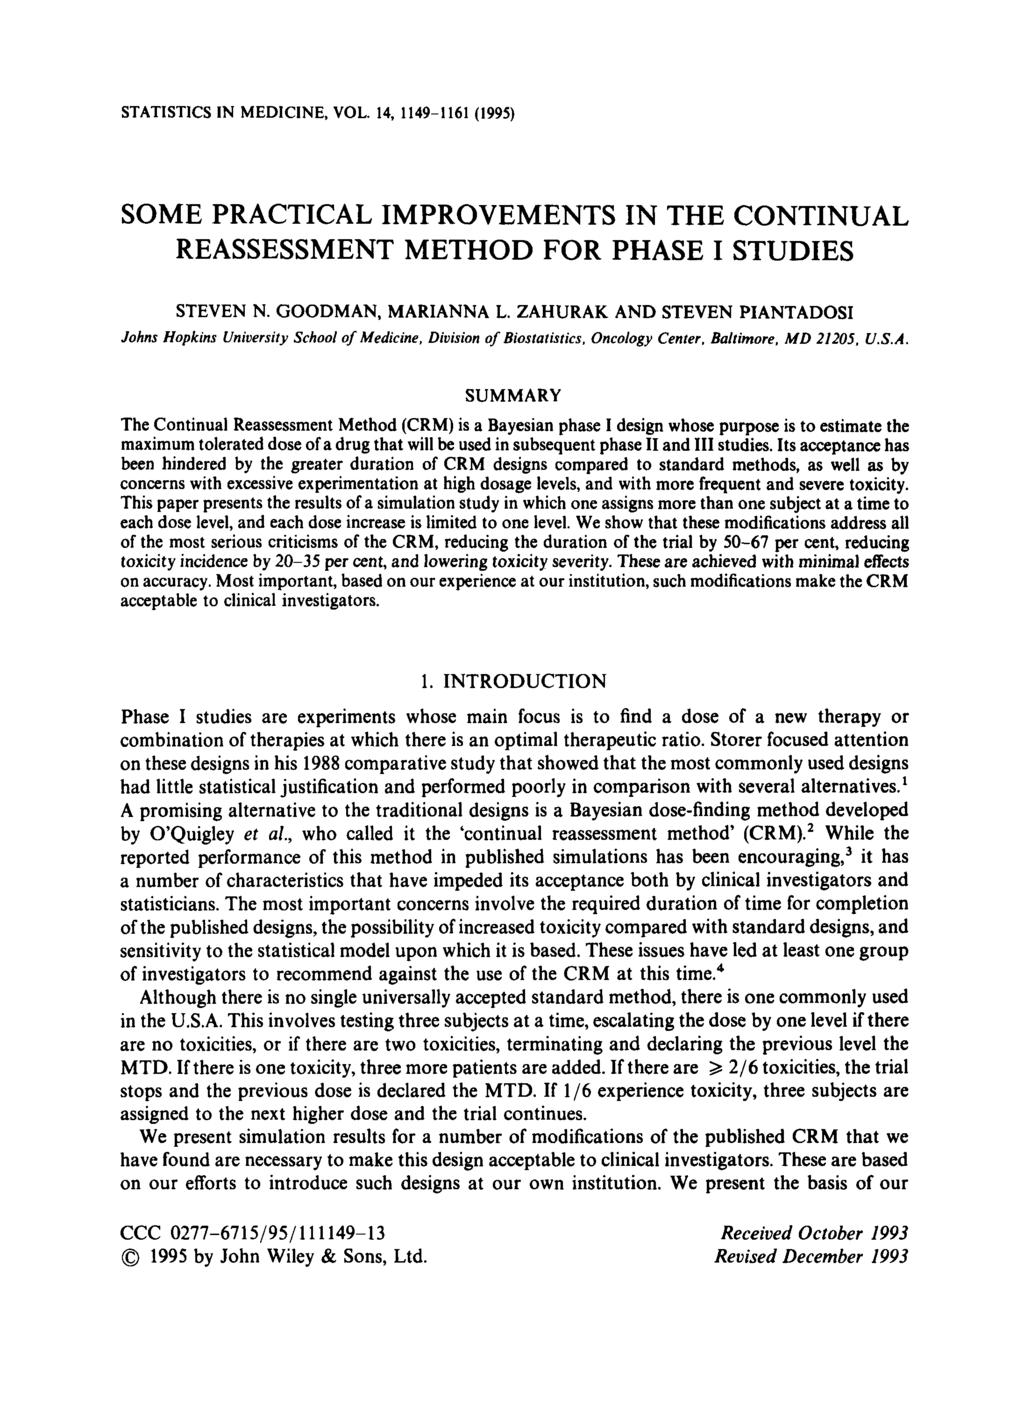 STATISTICS IN MEDICINE, VOL. 14, 1149-1161 (1995) SOME PRACTICAL IMPROVEMENTS IN THE CONTINUAL REASSESSMENT METHOD FOR PHASE I STUDIES STEVEN N. GOODMAN, MARIANNA L.